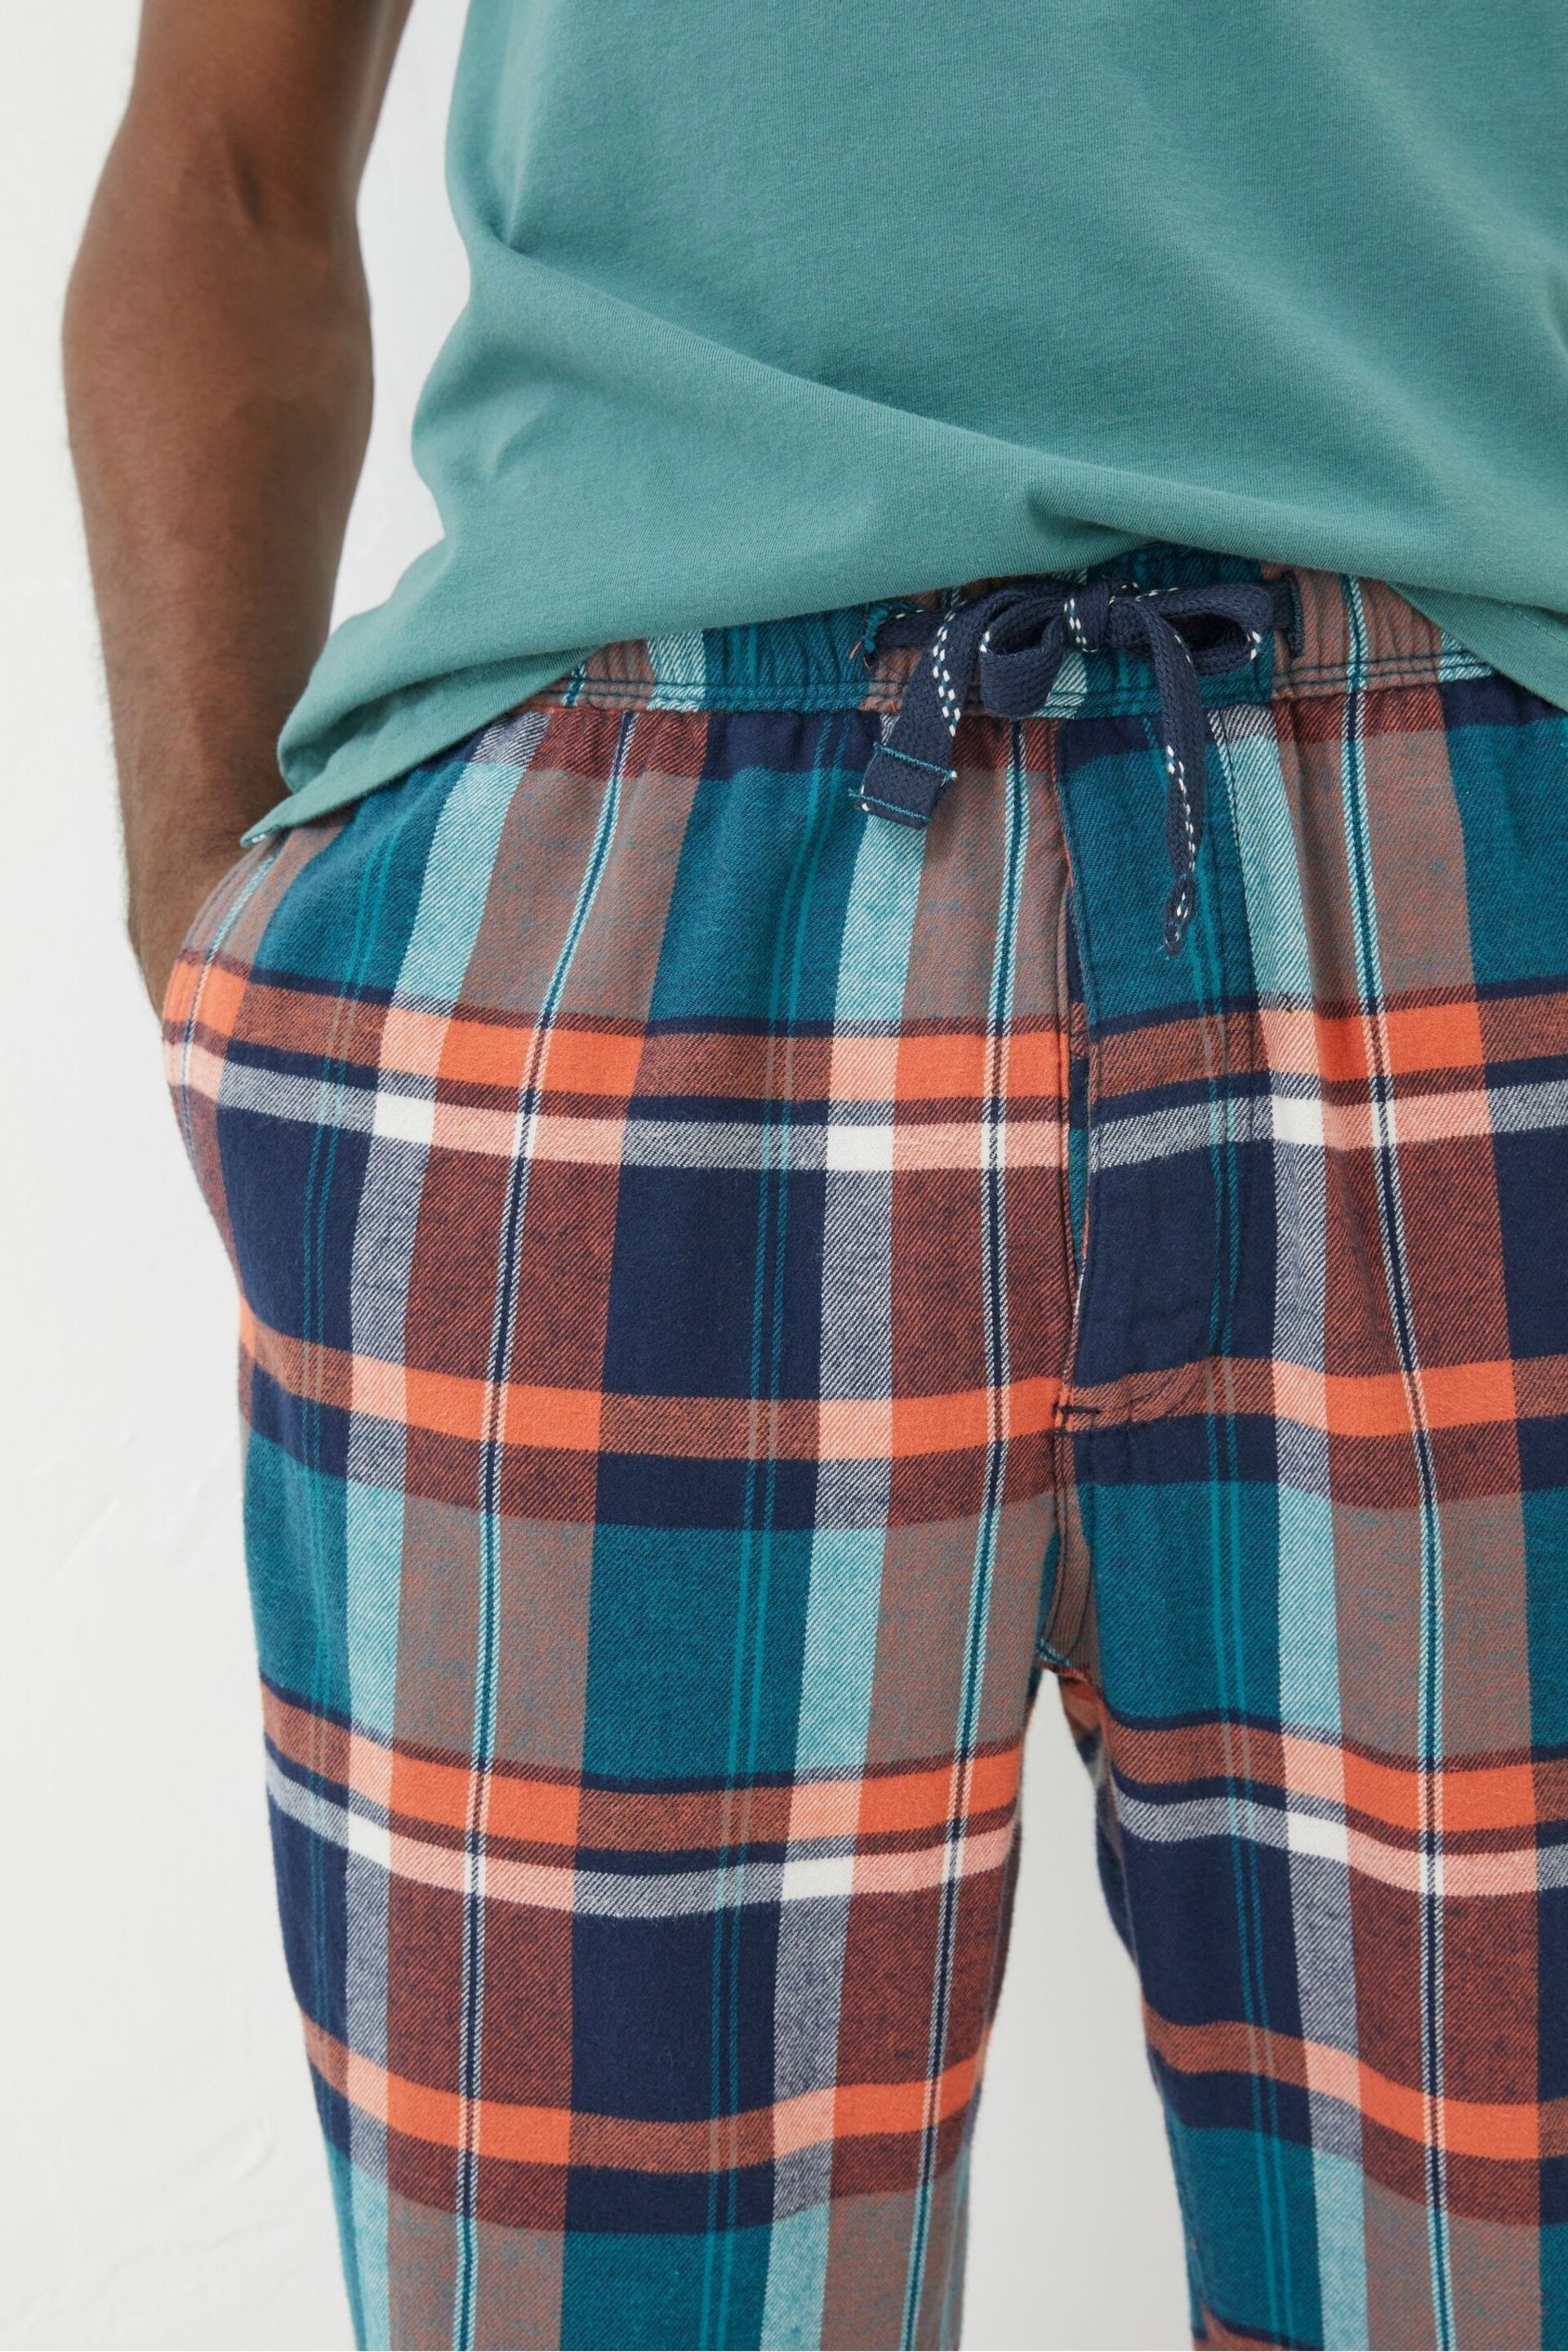 FatFace Green Orkney Light Checked Pyjama Bottoms - Image 3 of 4